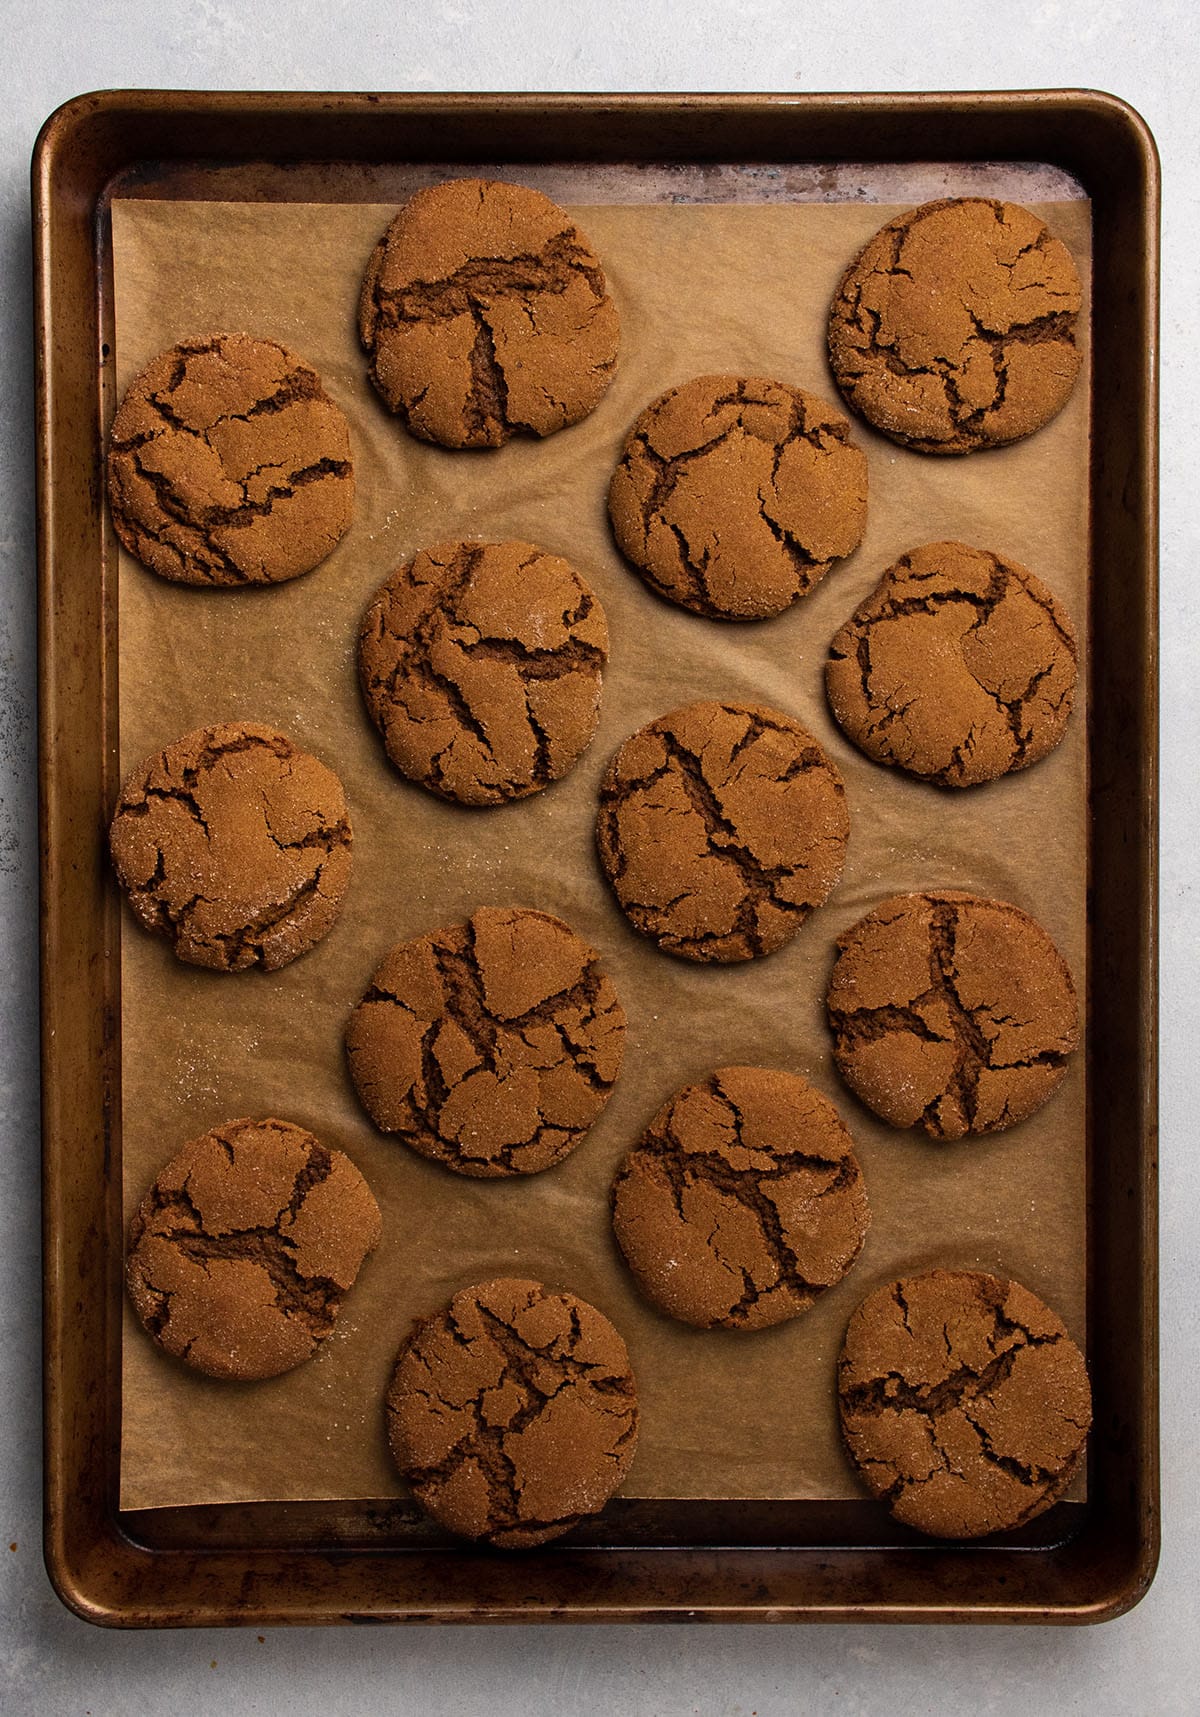 Cooked gingersnaps on a baking sheet lined with parchment paper.